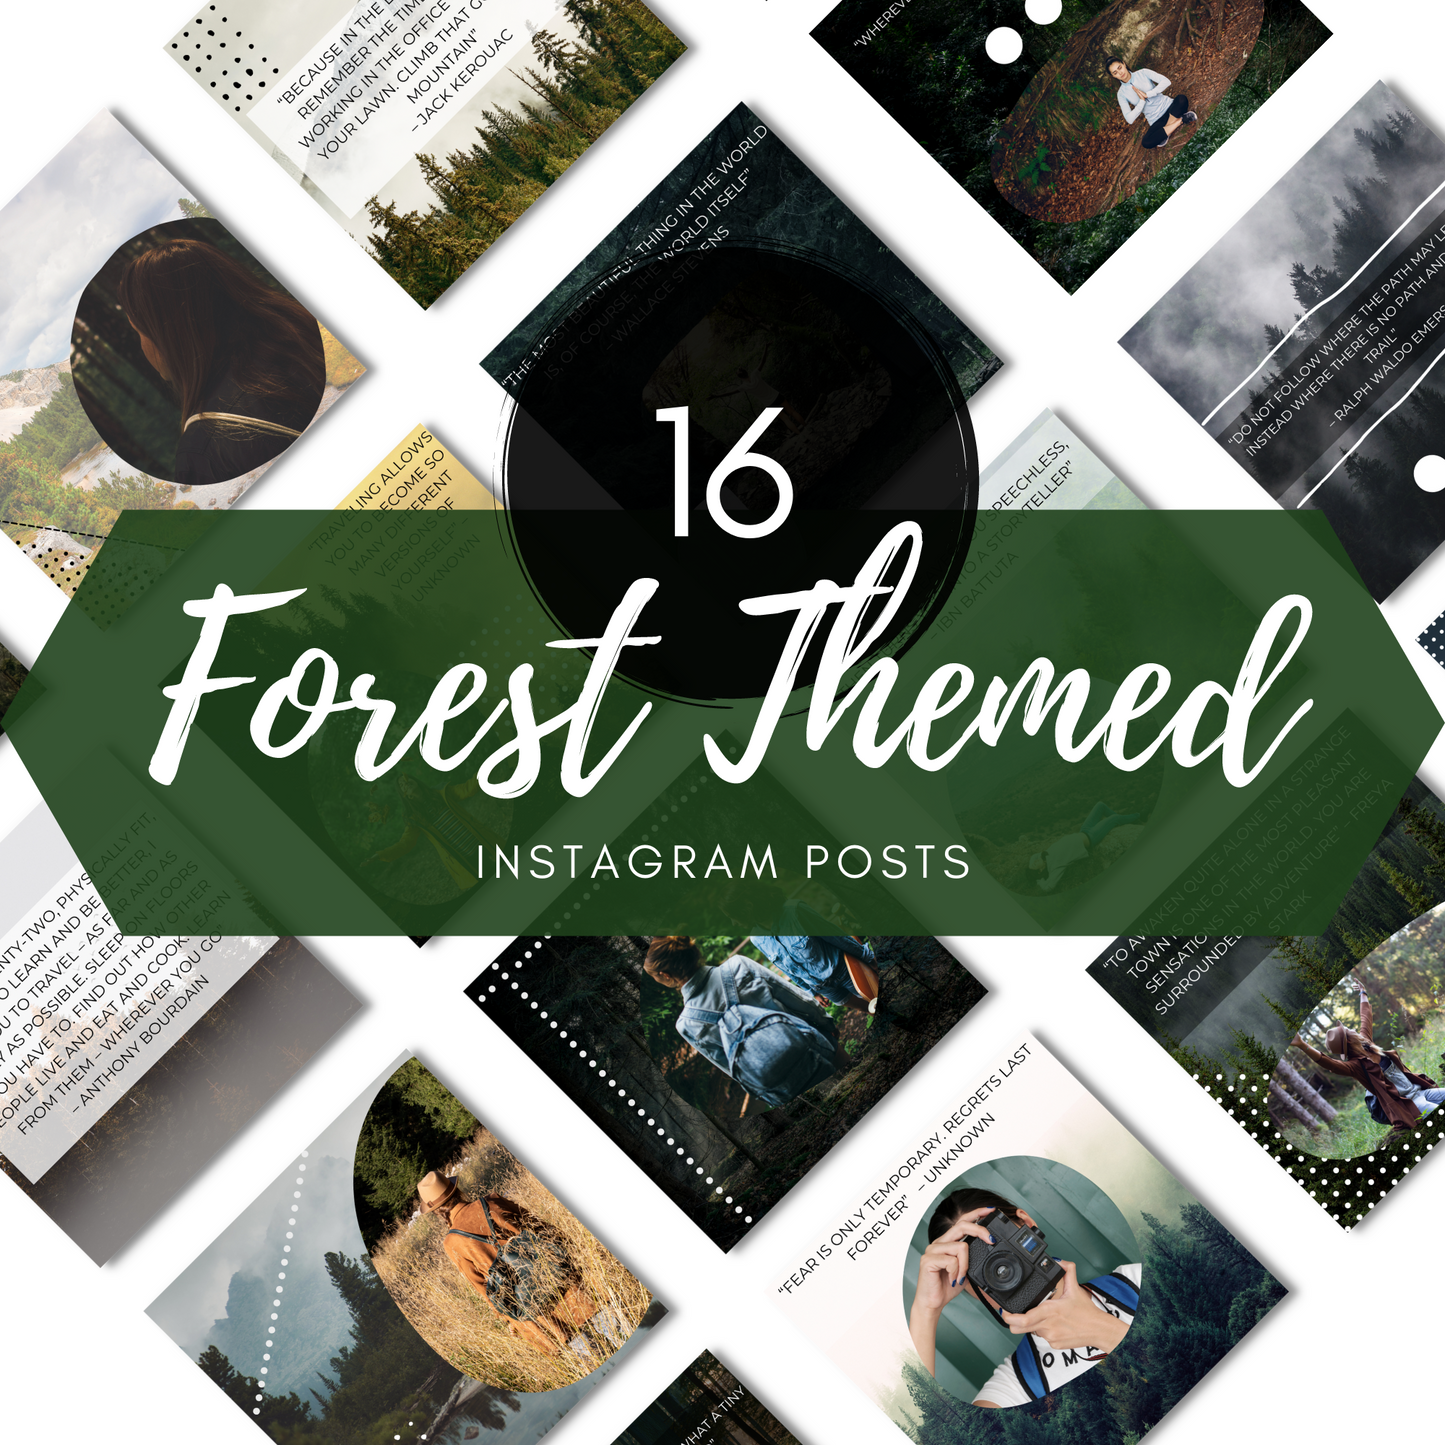 16 Forest and Travel Instagram Post Templates | Editable in Canva | IG Engagement | Social Media Posts